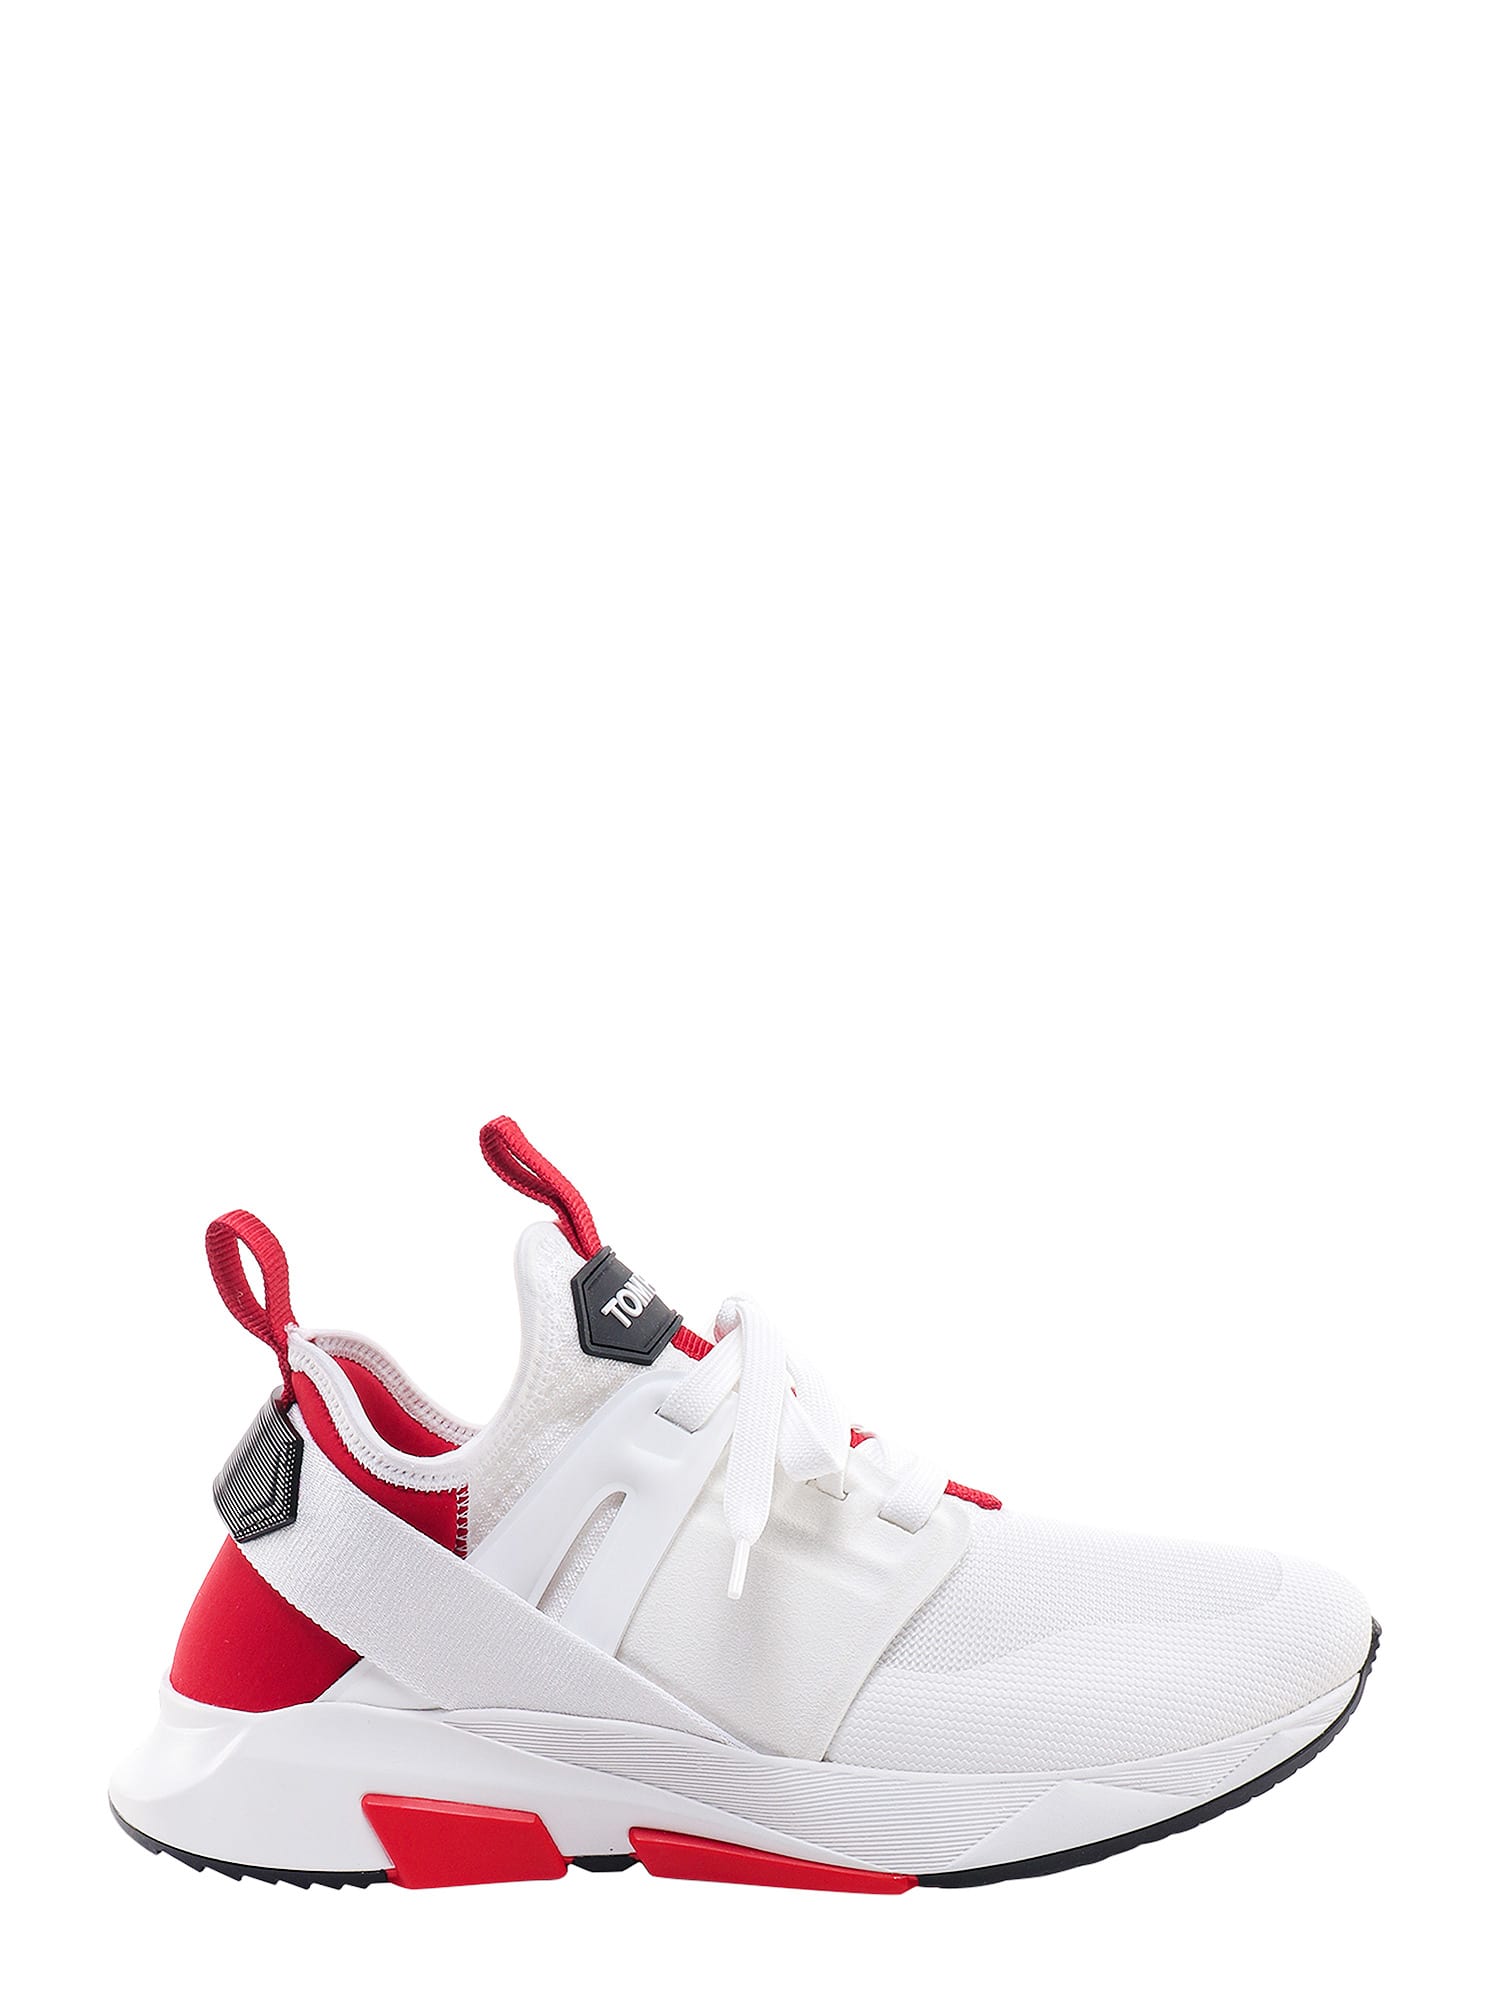 Tom Ford Jago Panelled Low-top Sneakers In White | ModeSens